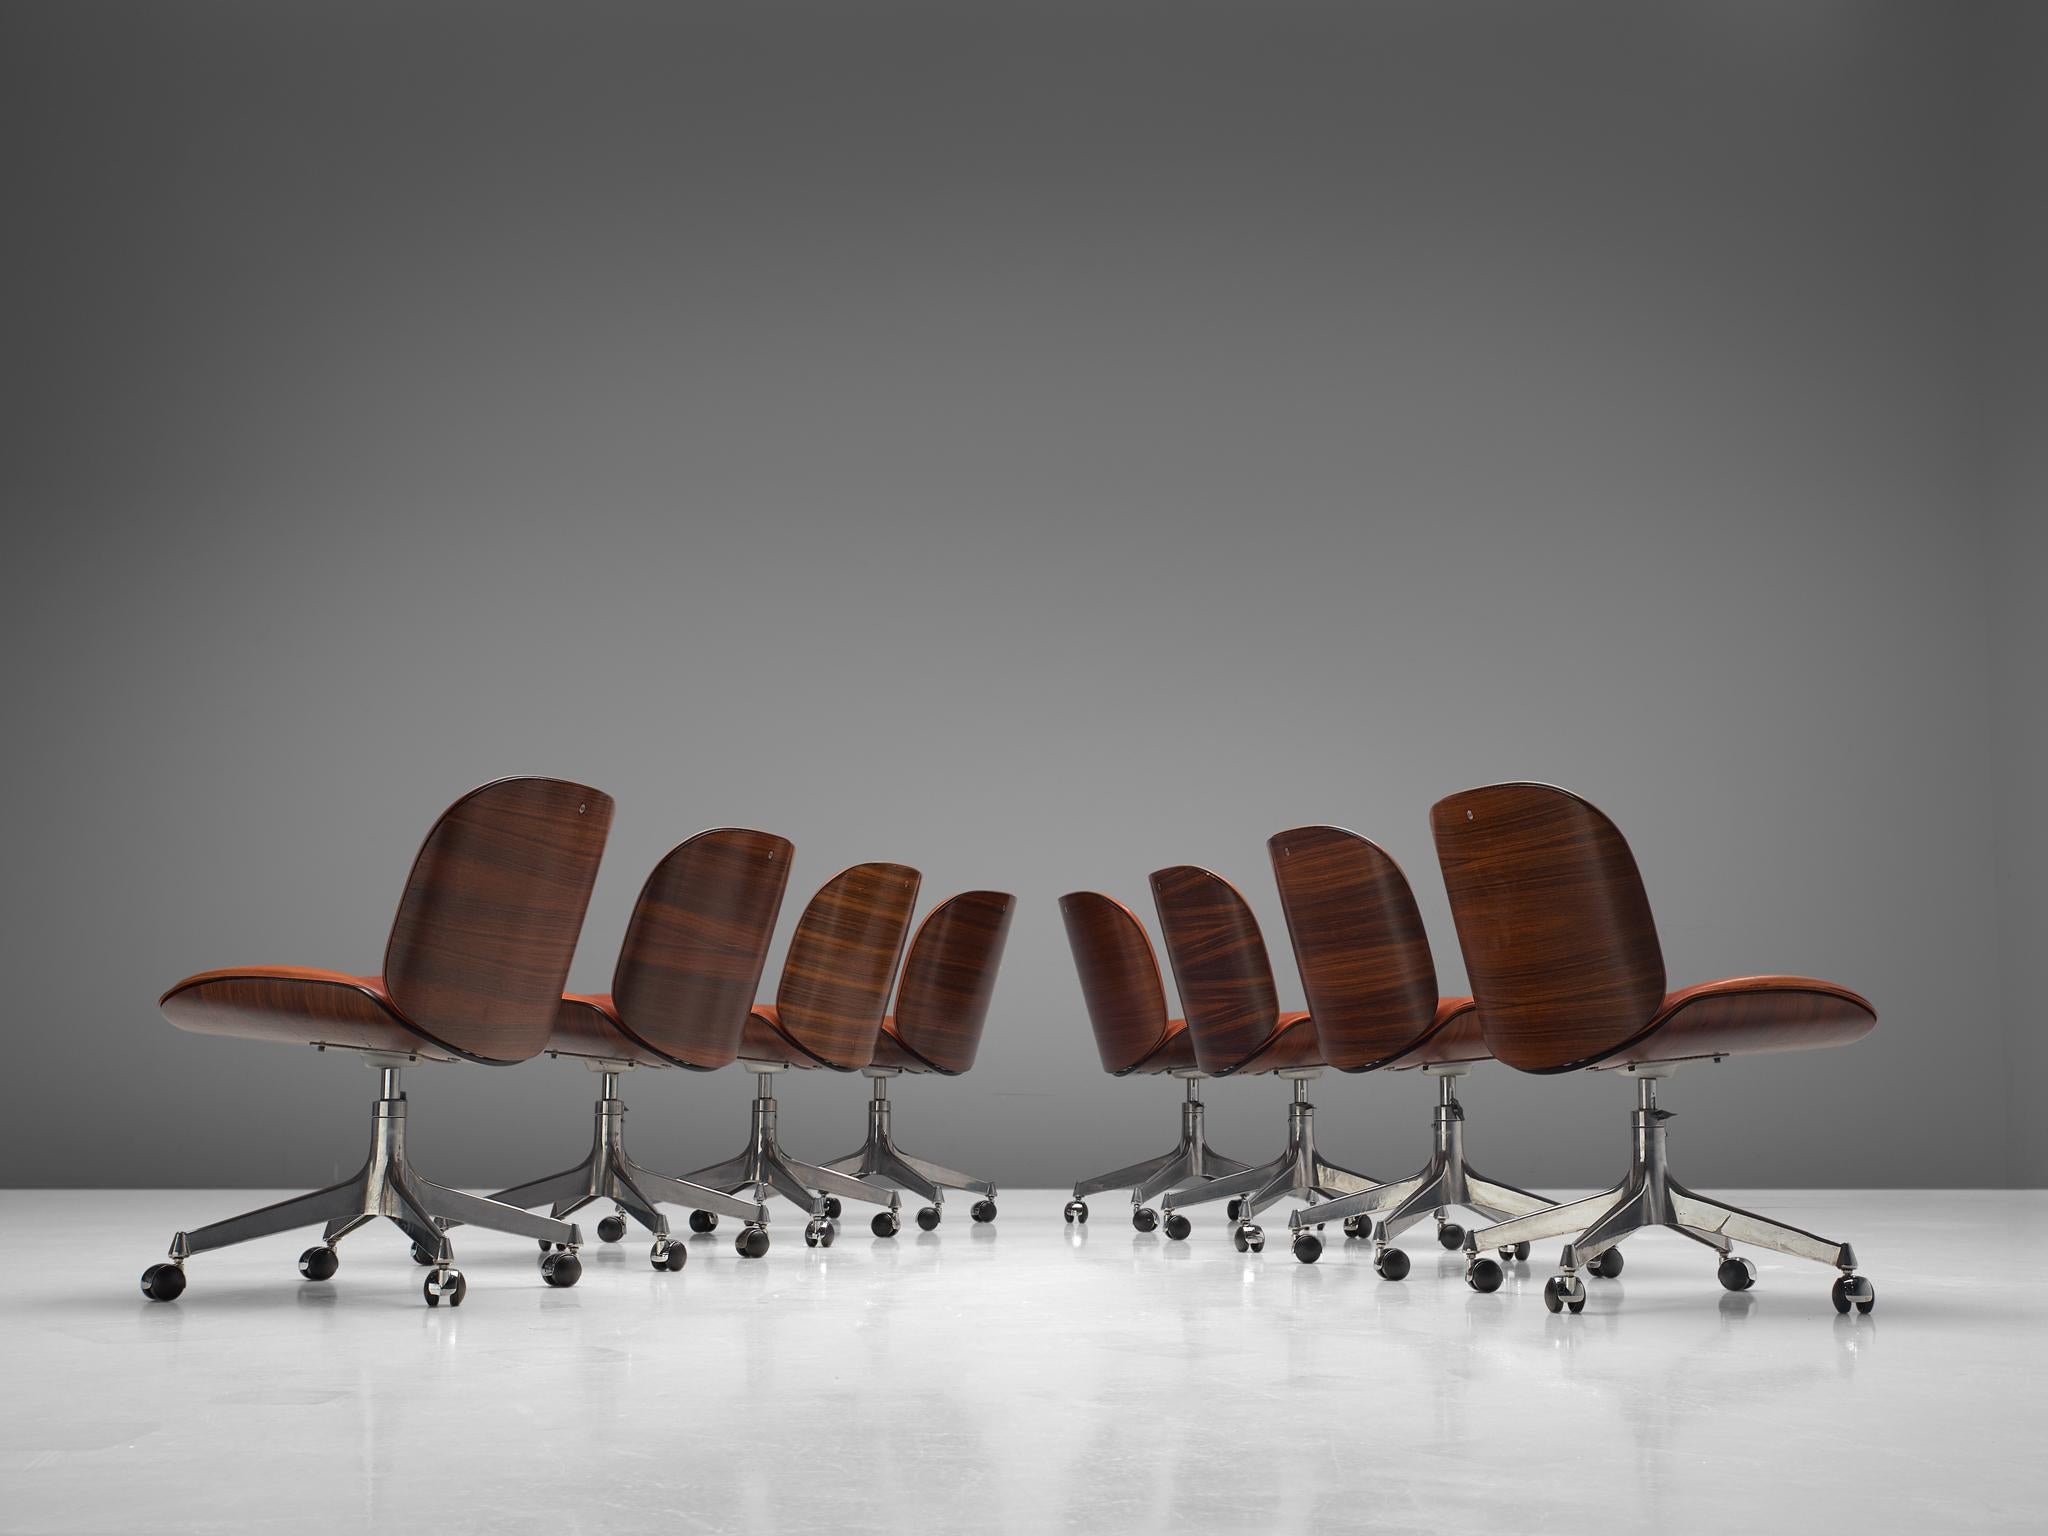 Ico Parisi for MIM Roma, set of 8 office chairs, rosewood, metal and leather, Italy, 1950s.

Set of eight swivel office chairs from the 'Terni' series by MIM Roma. The seating and back consist of curved shells made of rosewood, which hold the